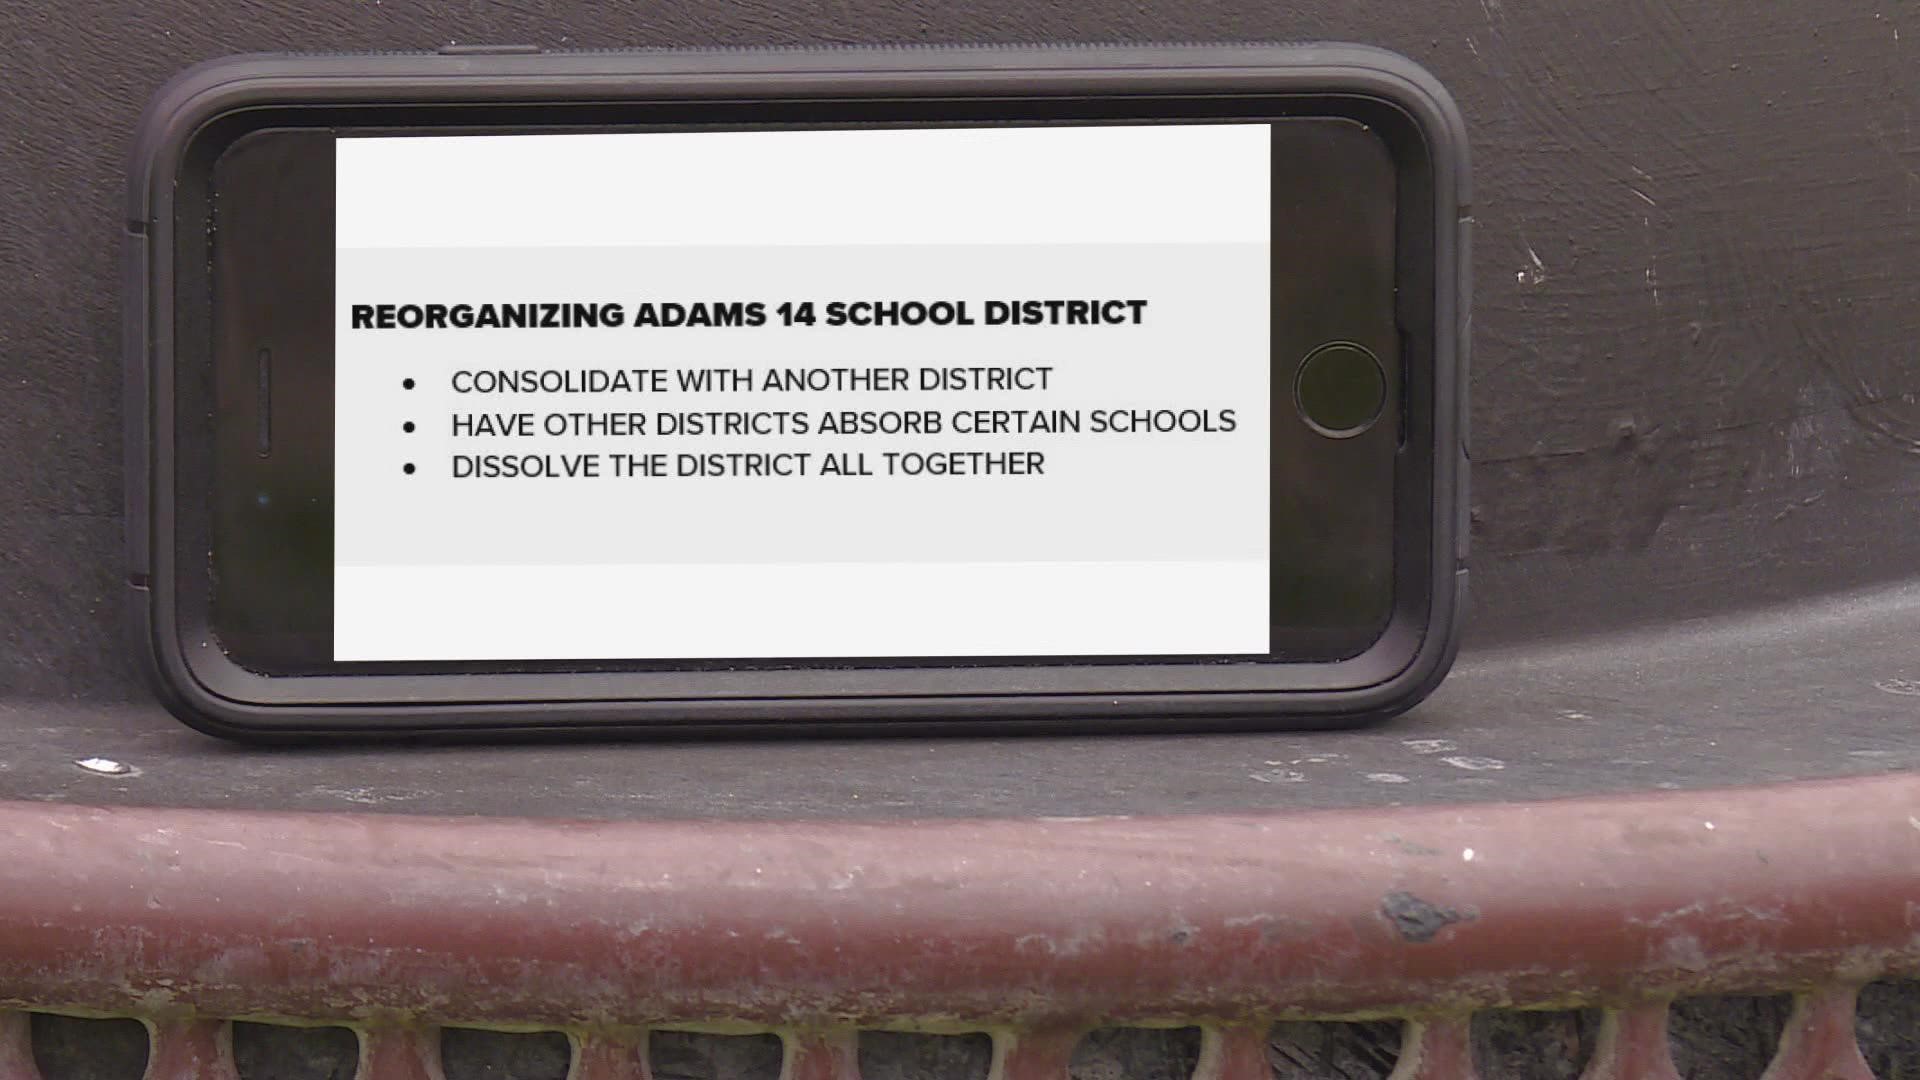 The Colorado State Board of Education approved an order that would begin the process to explore reorganizing the Adams 14 school district.